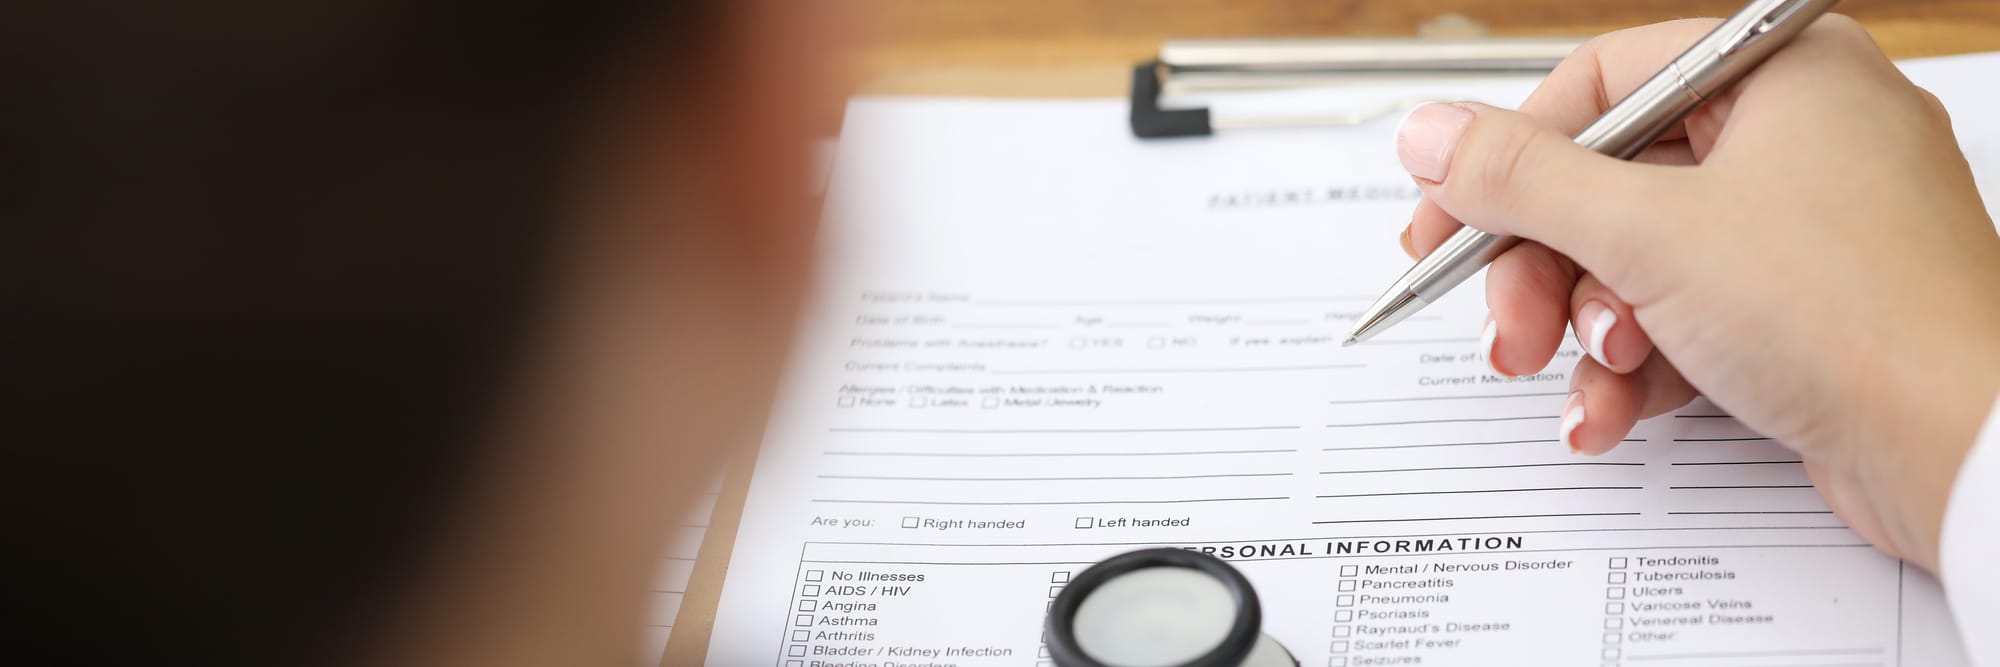 woman filling out paperwork with medical information